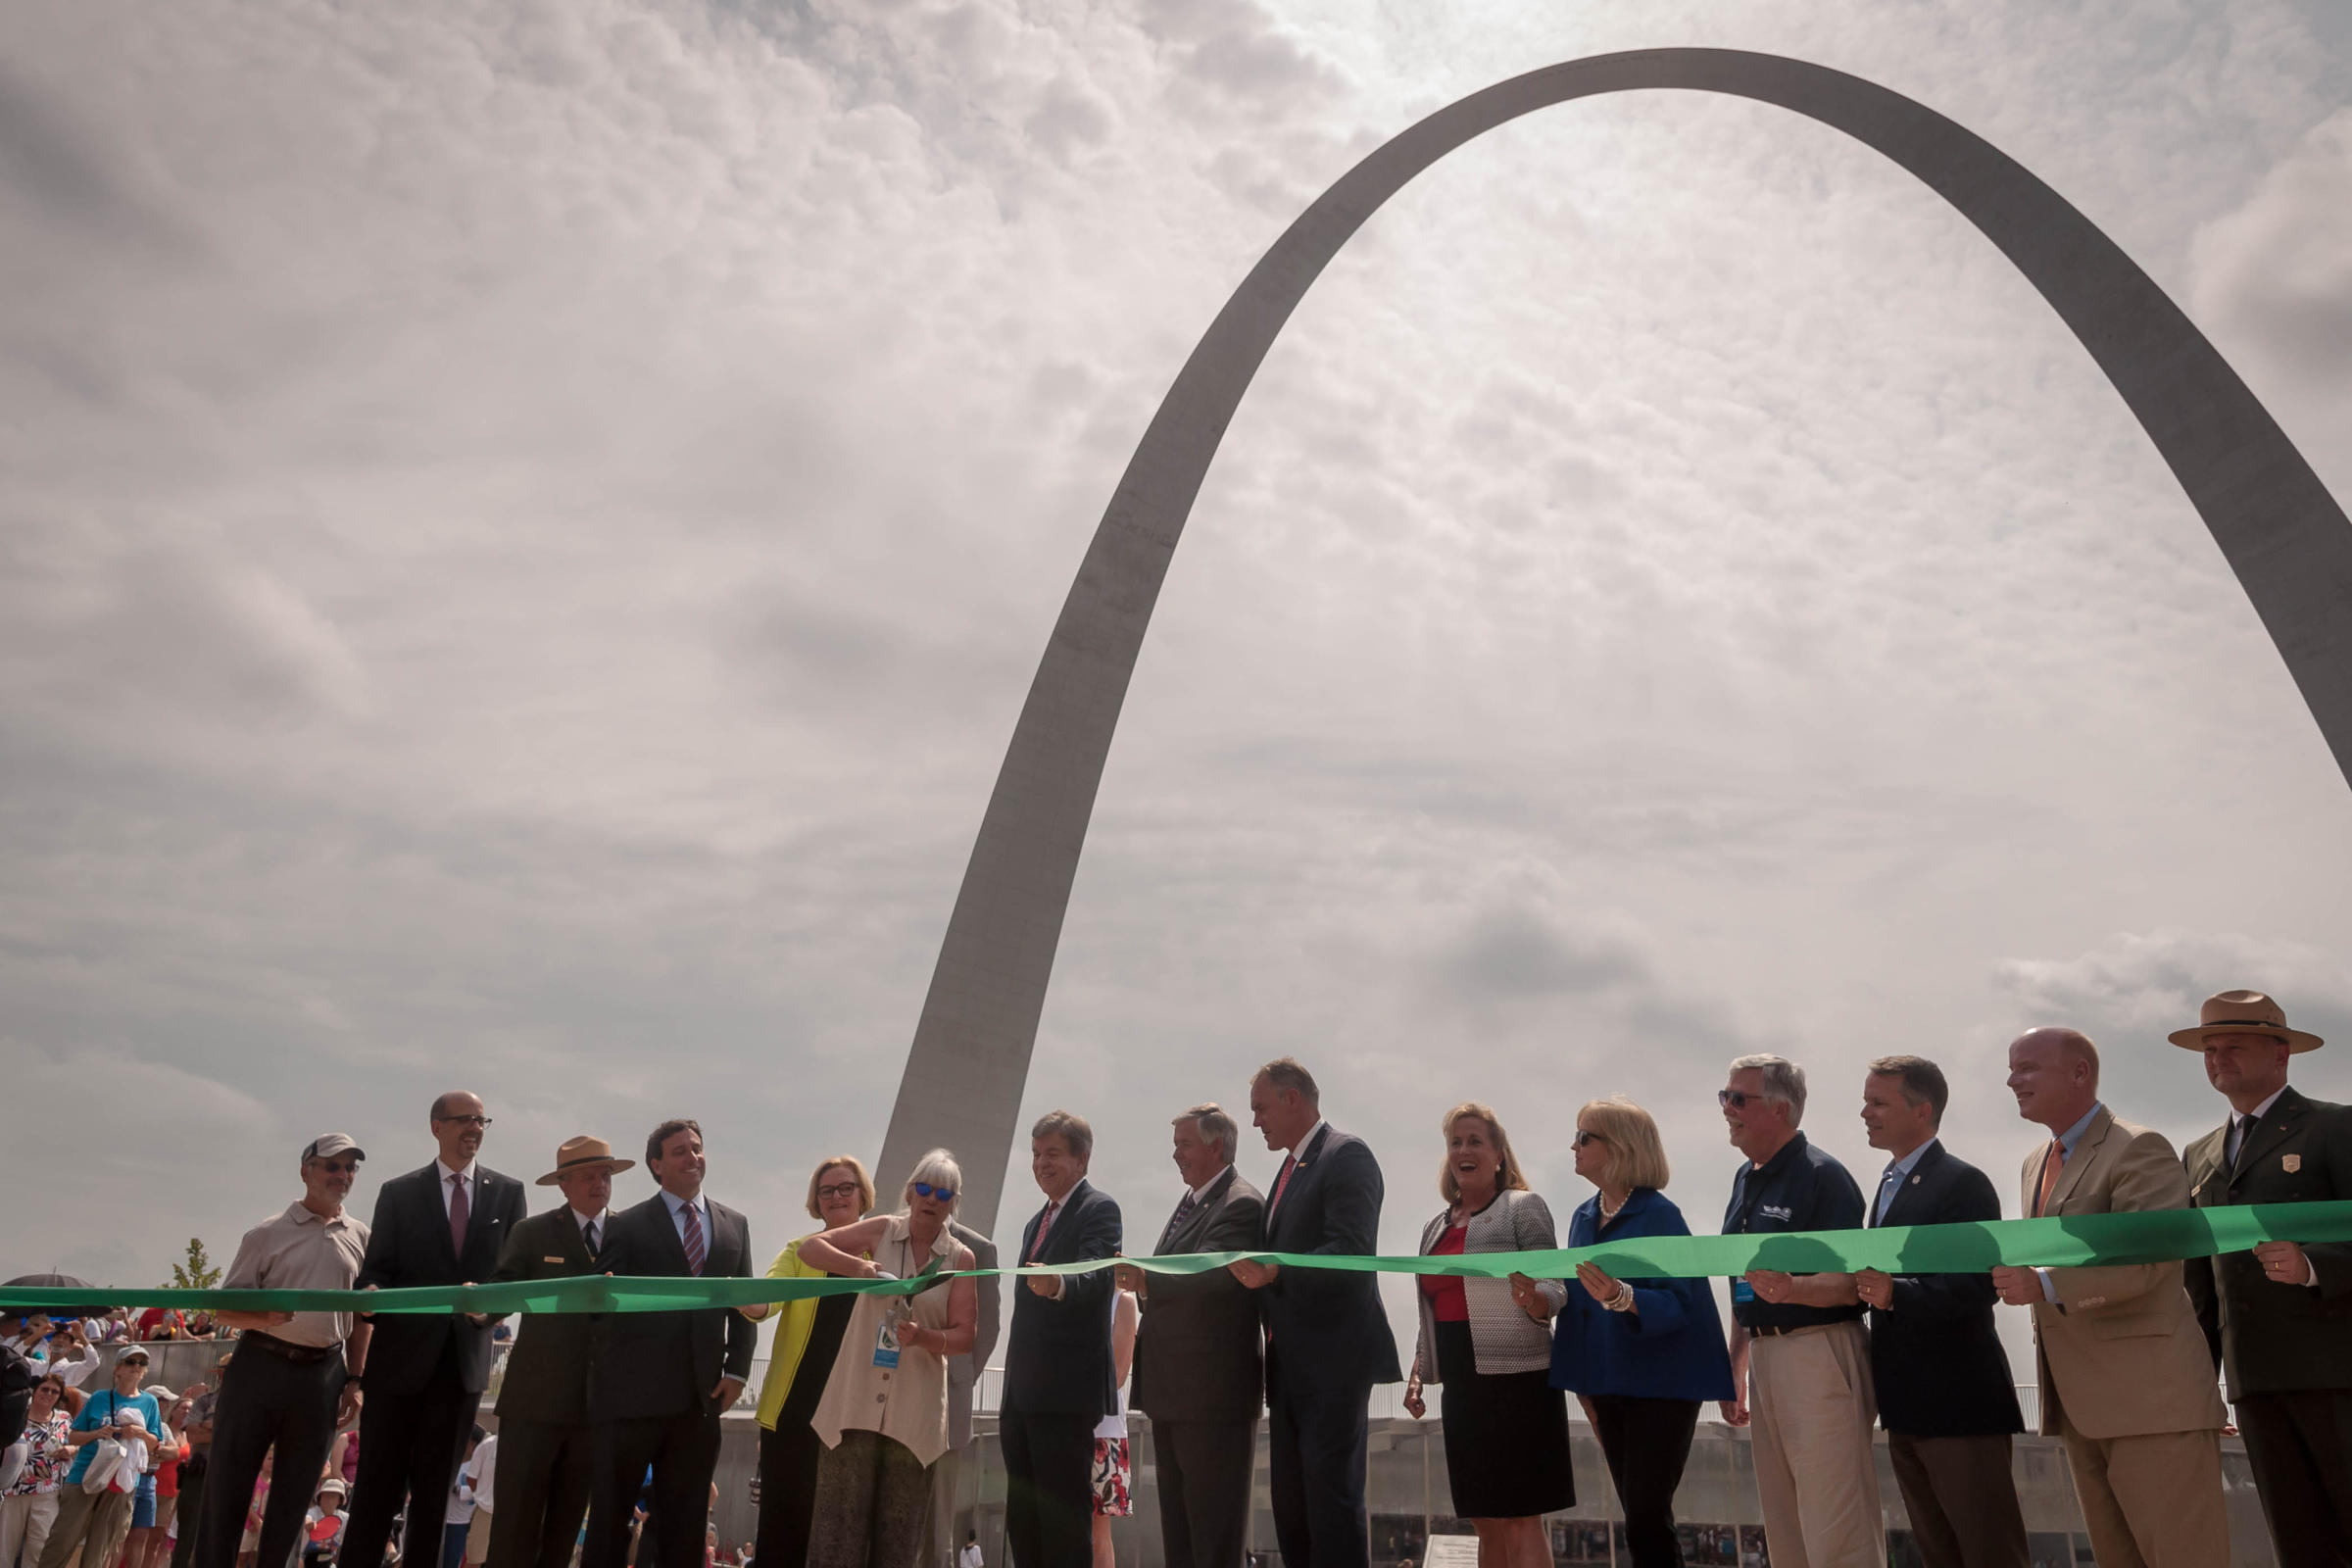 Amid #ArchSoWhite controversy, black officials to hold second ribbon-cutting | St. Louis Public ...